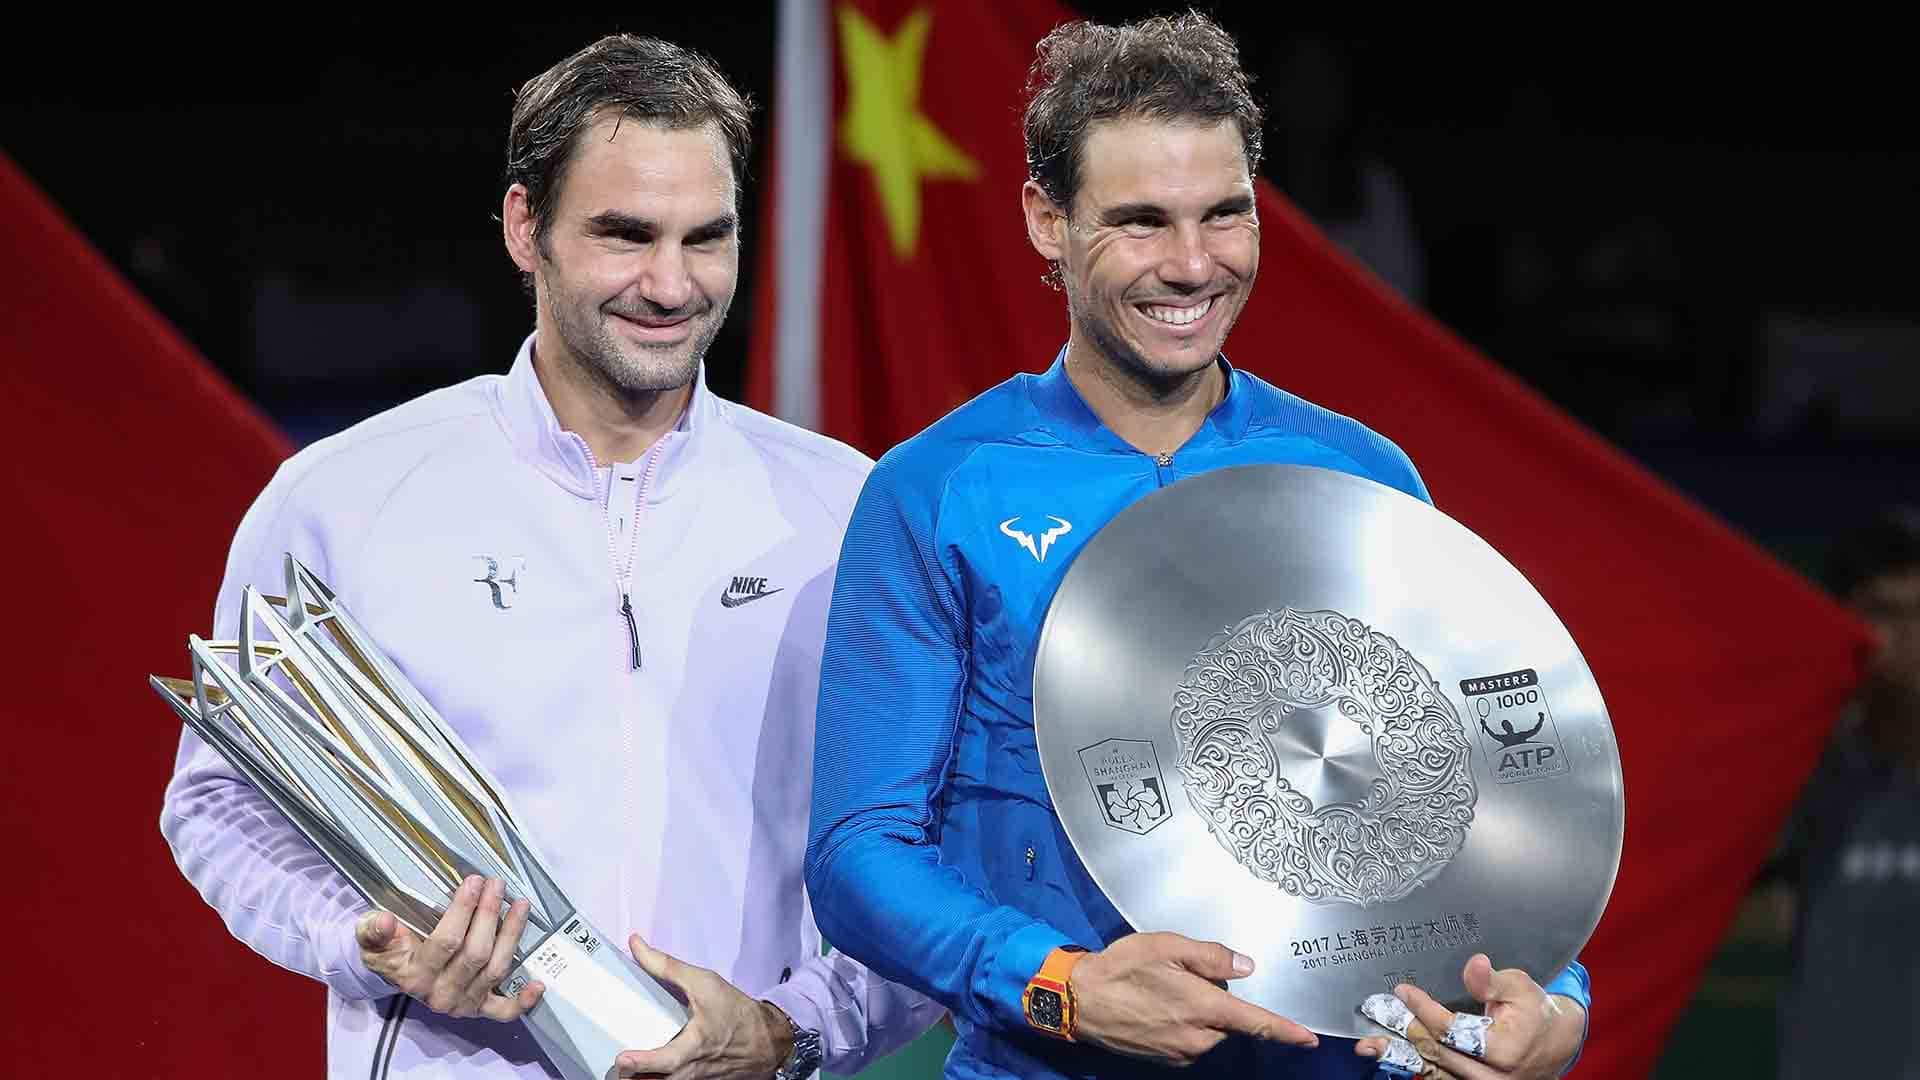 Roger Federer and Rafael Nadal contested their first final in Asia at the 2017 Rolex Shanghai Masters.